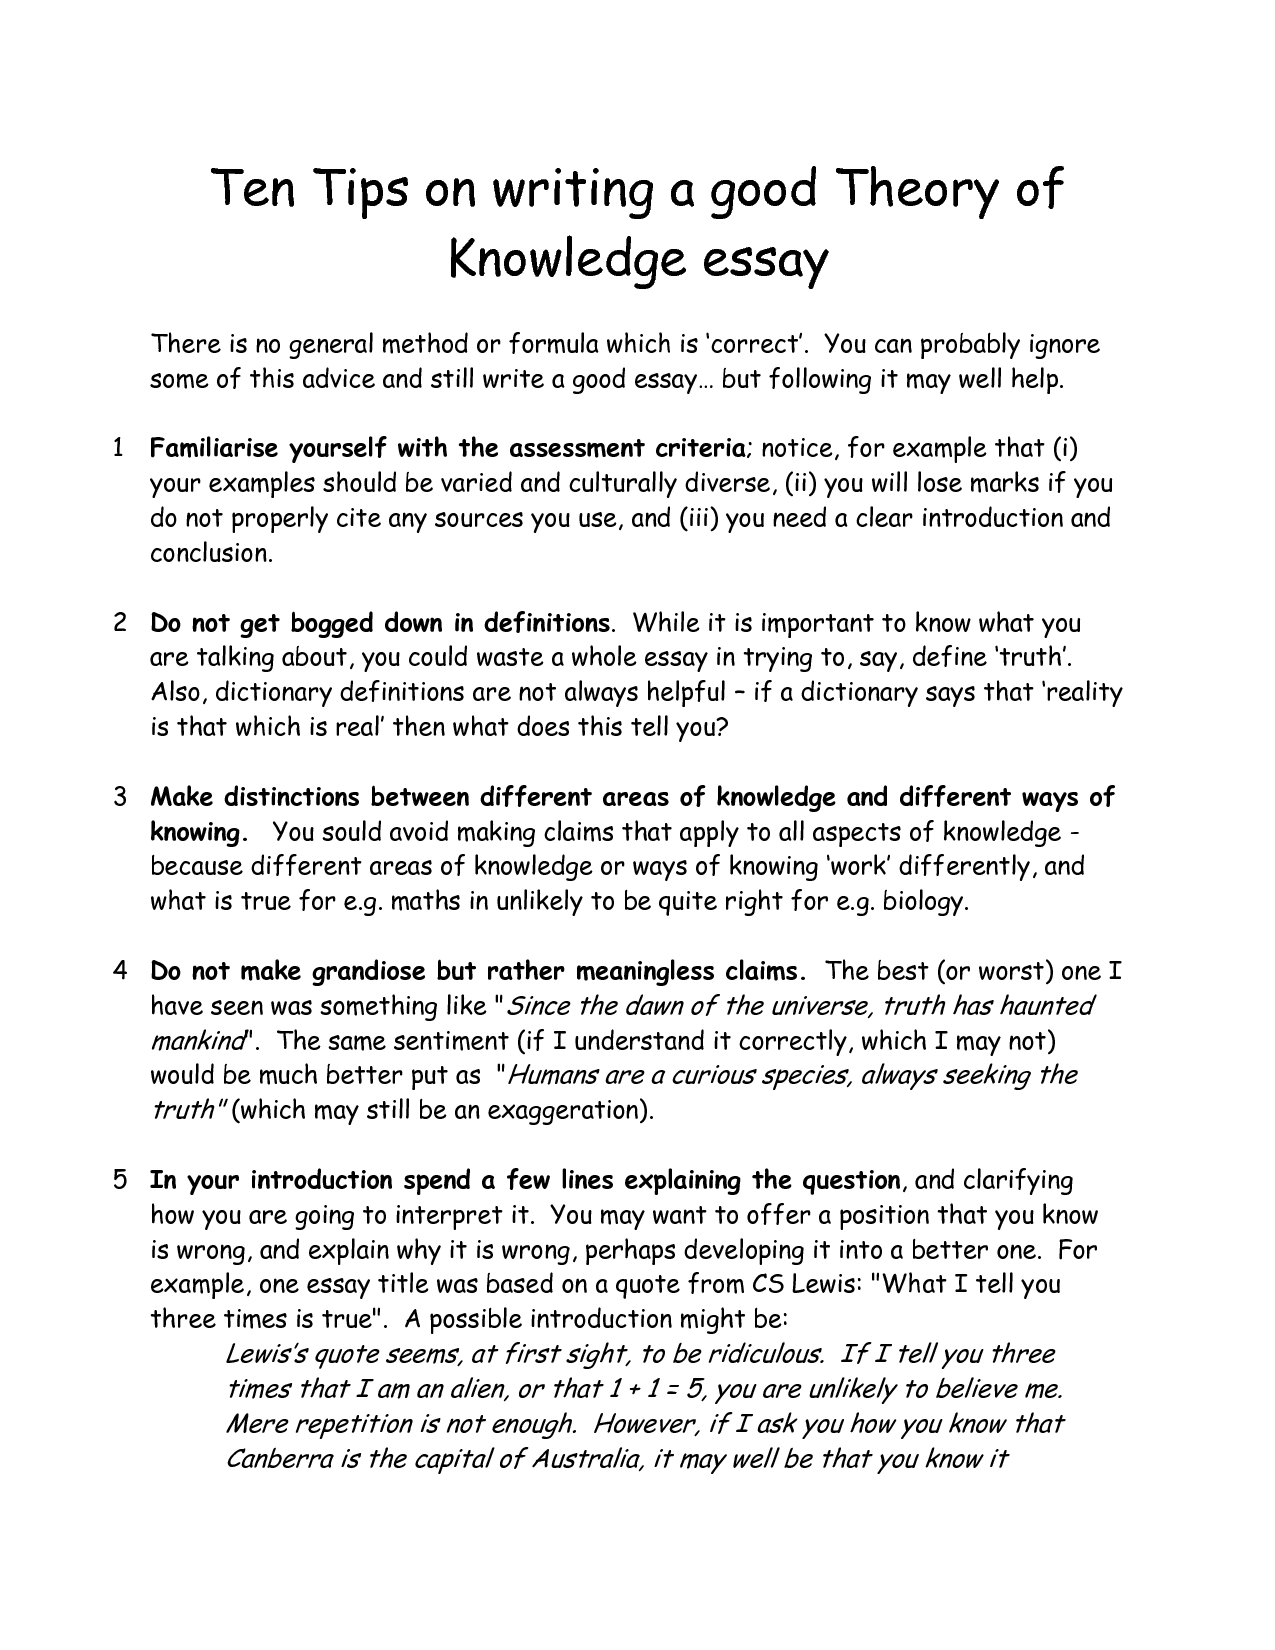 How to write an essay about myself